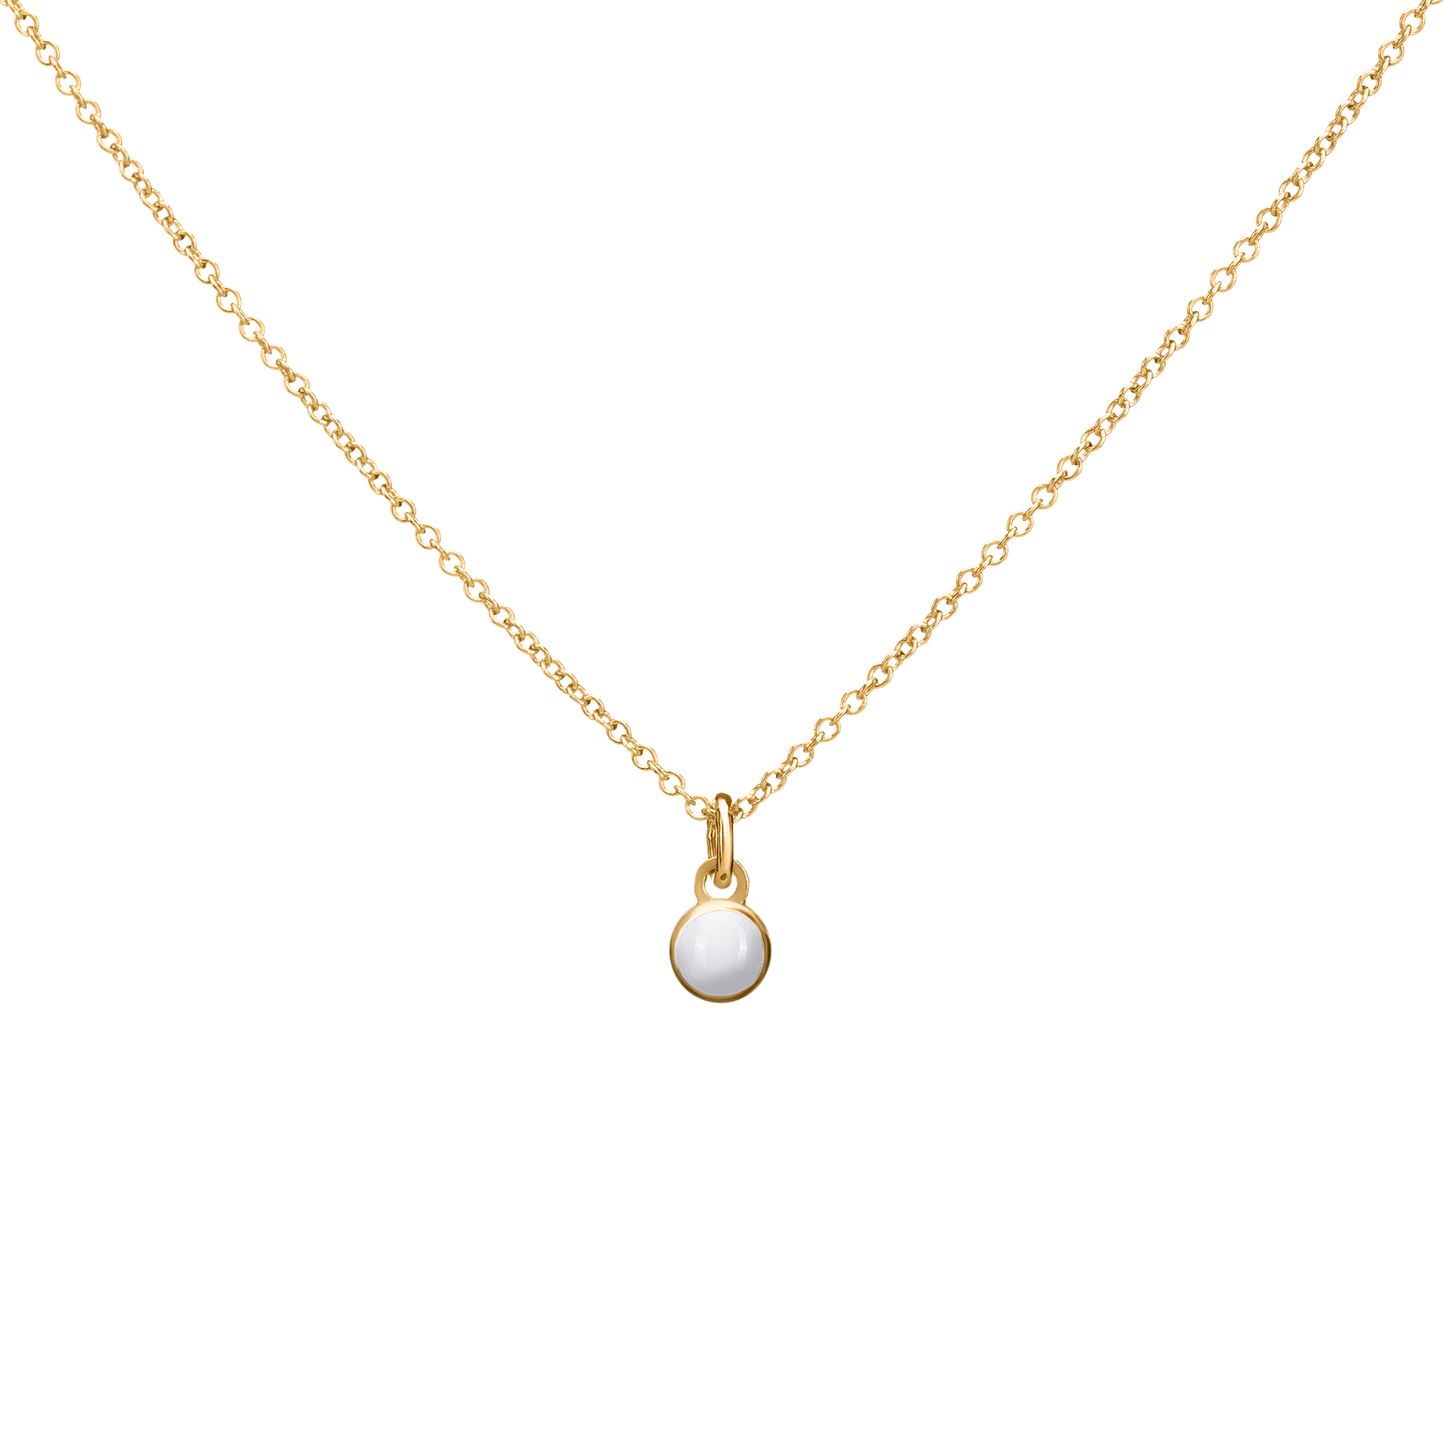 THE PERFECT CHARM in 14k gold vermeil